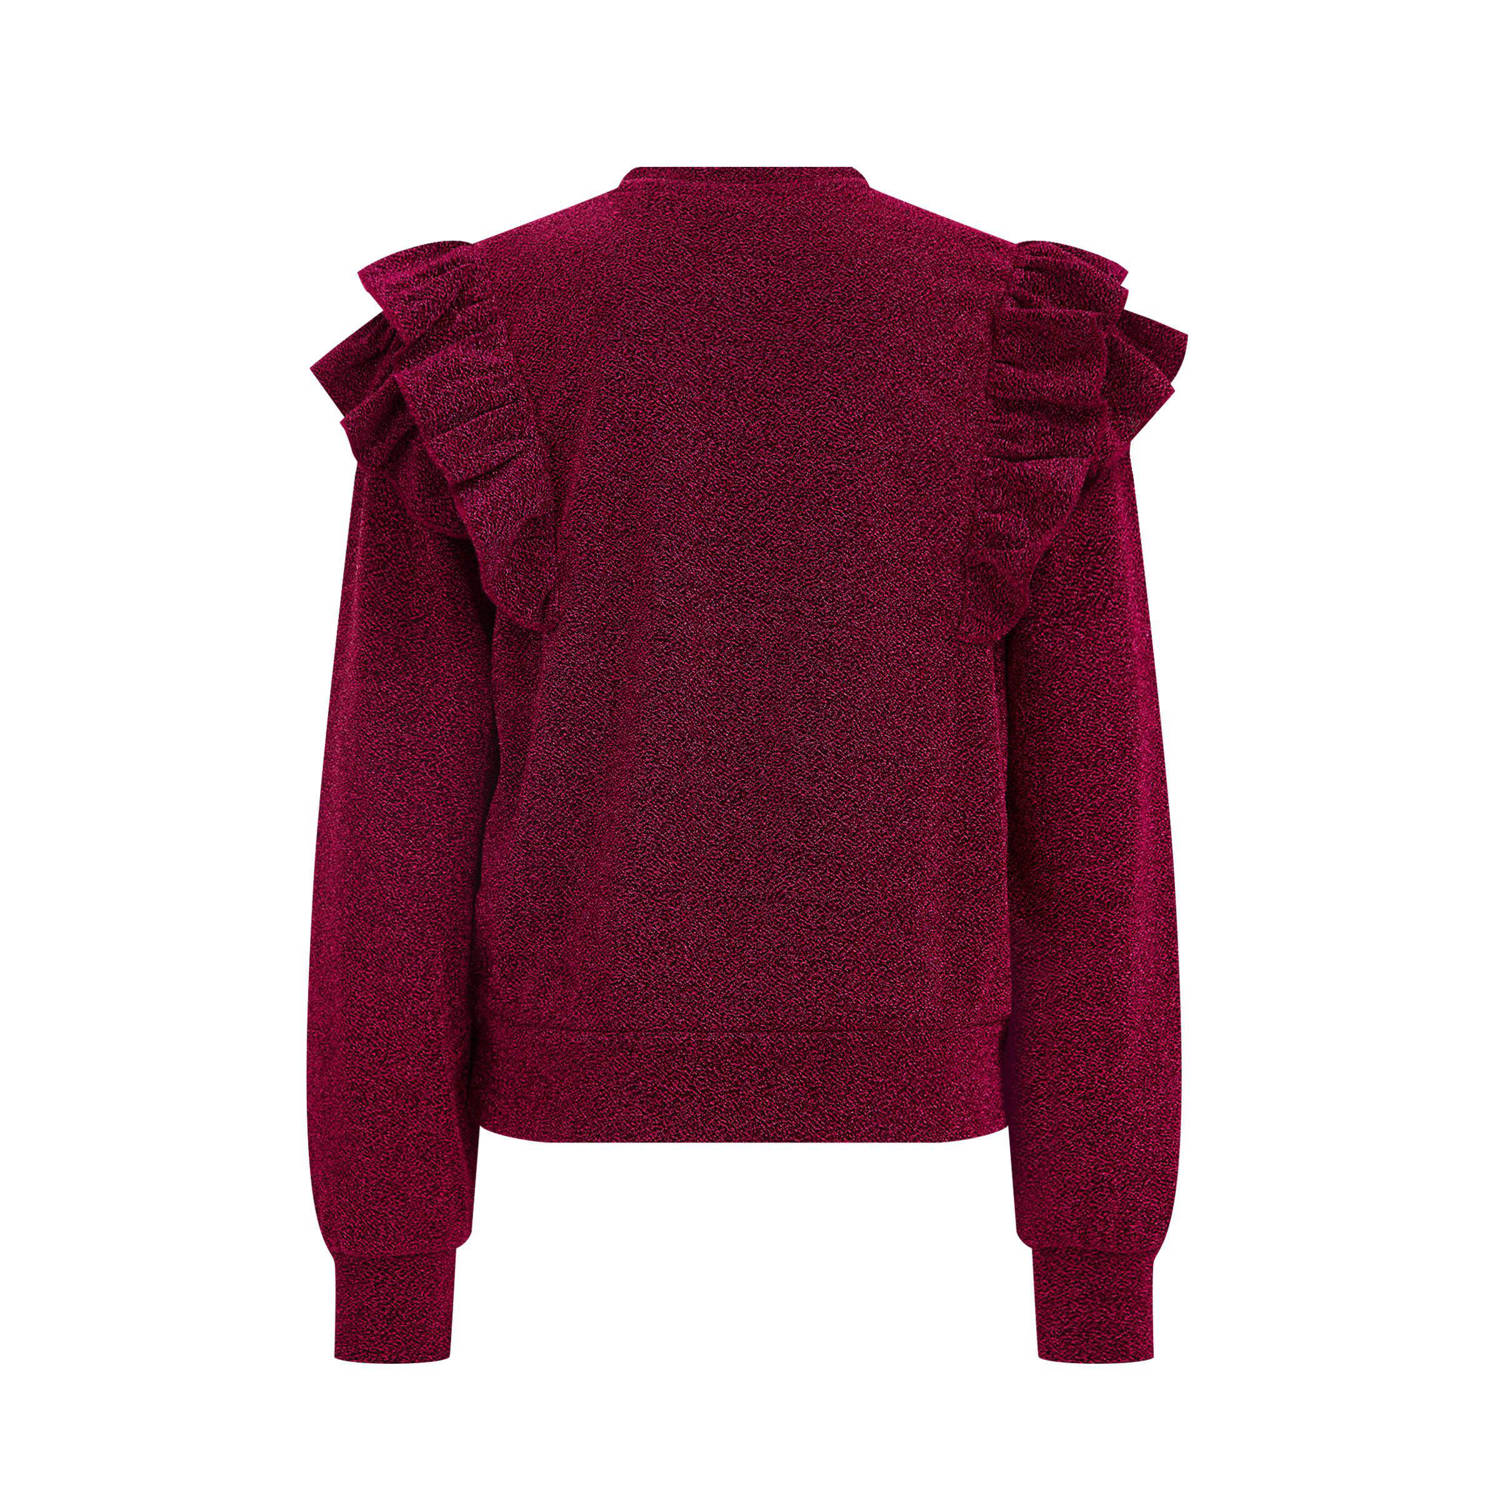 WE Fashion sweater met ruches donkerrood